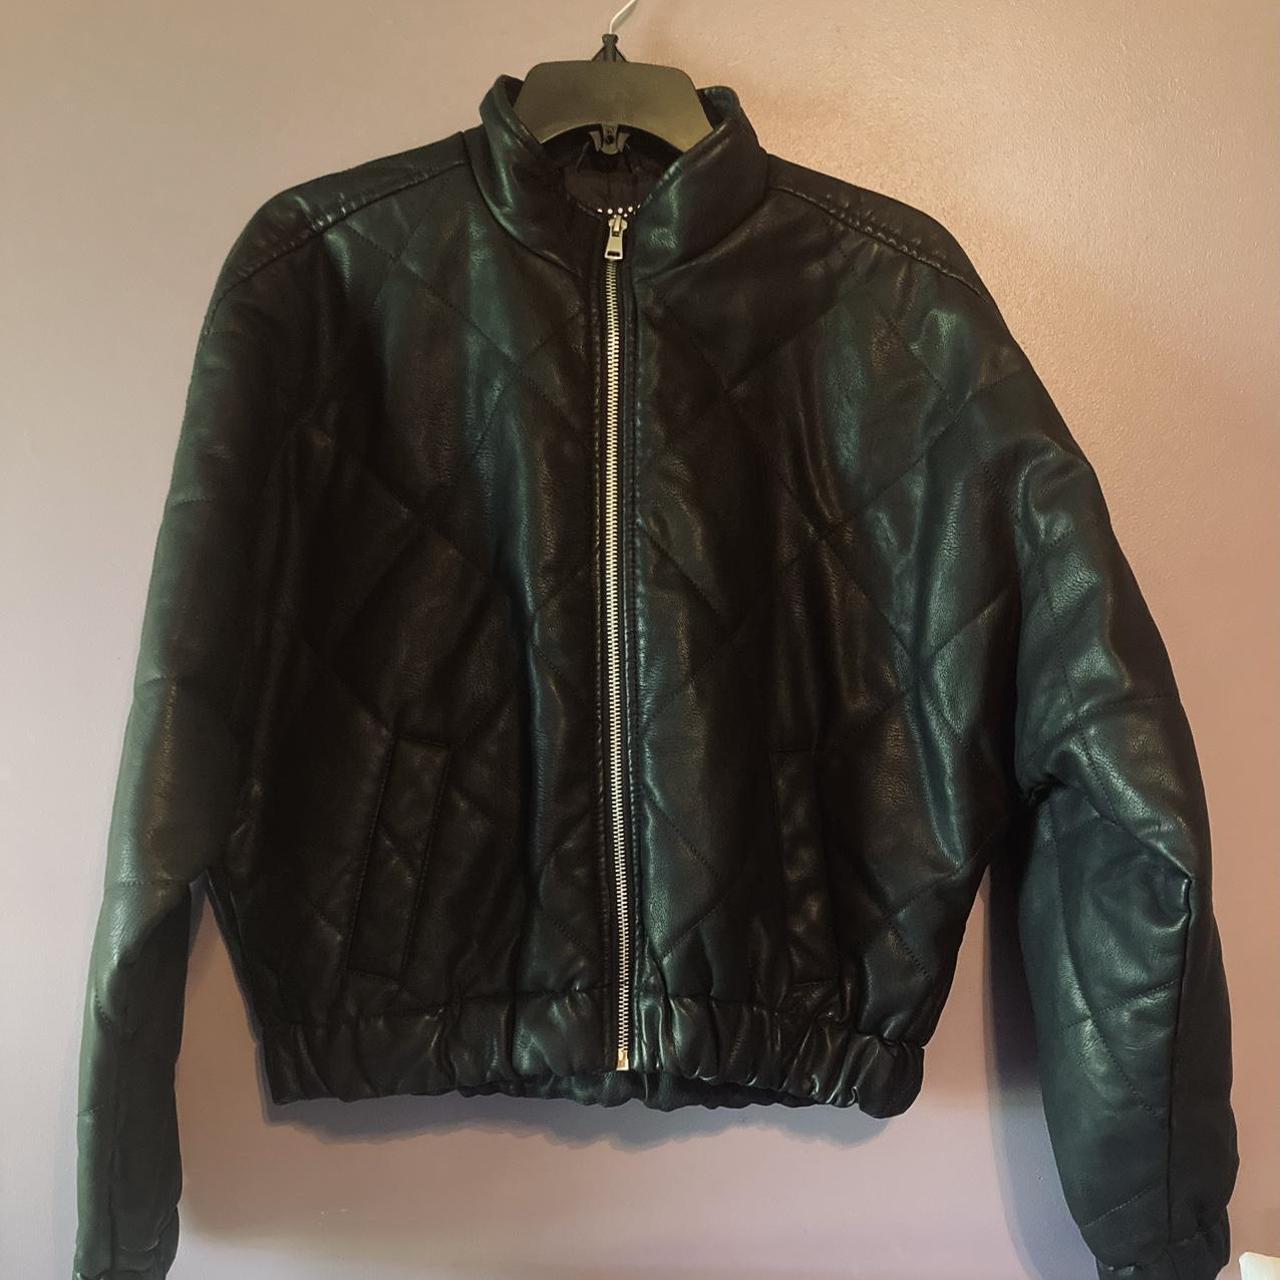 Never worn, brand new Alivia Ford leather bomber